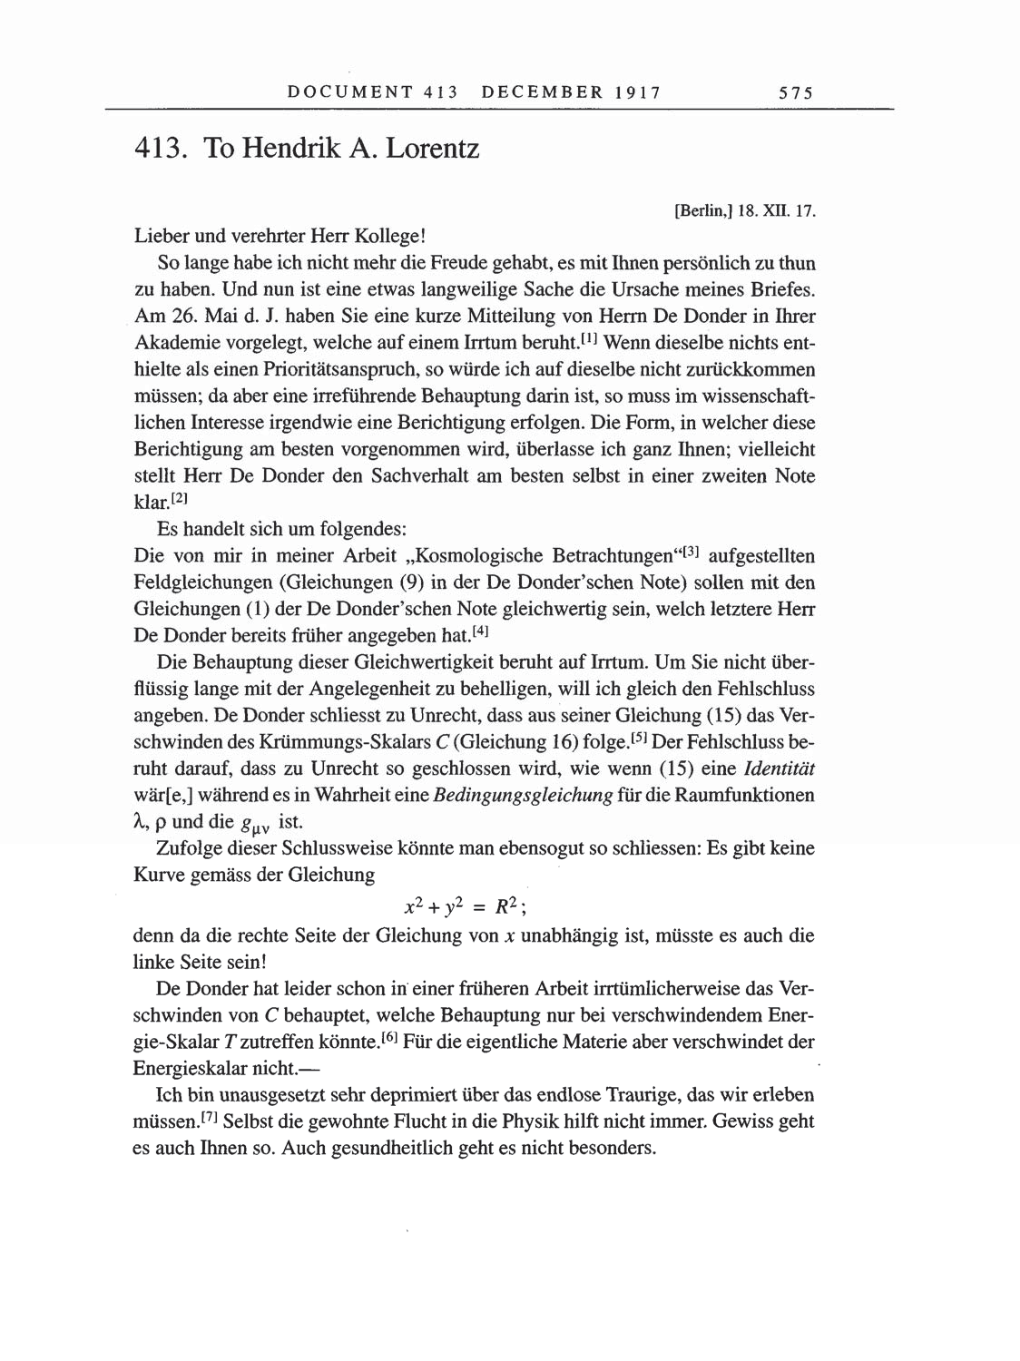 Volume 8, Part A: The Berlin Years: Correspondence 1914-1917 page 575